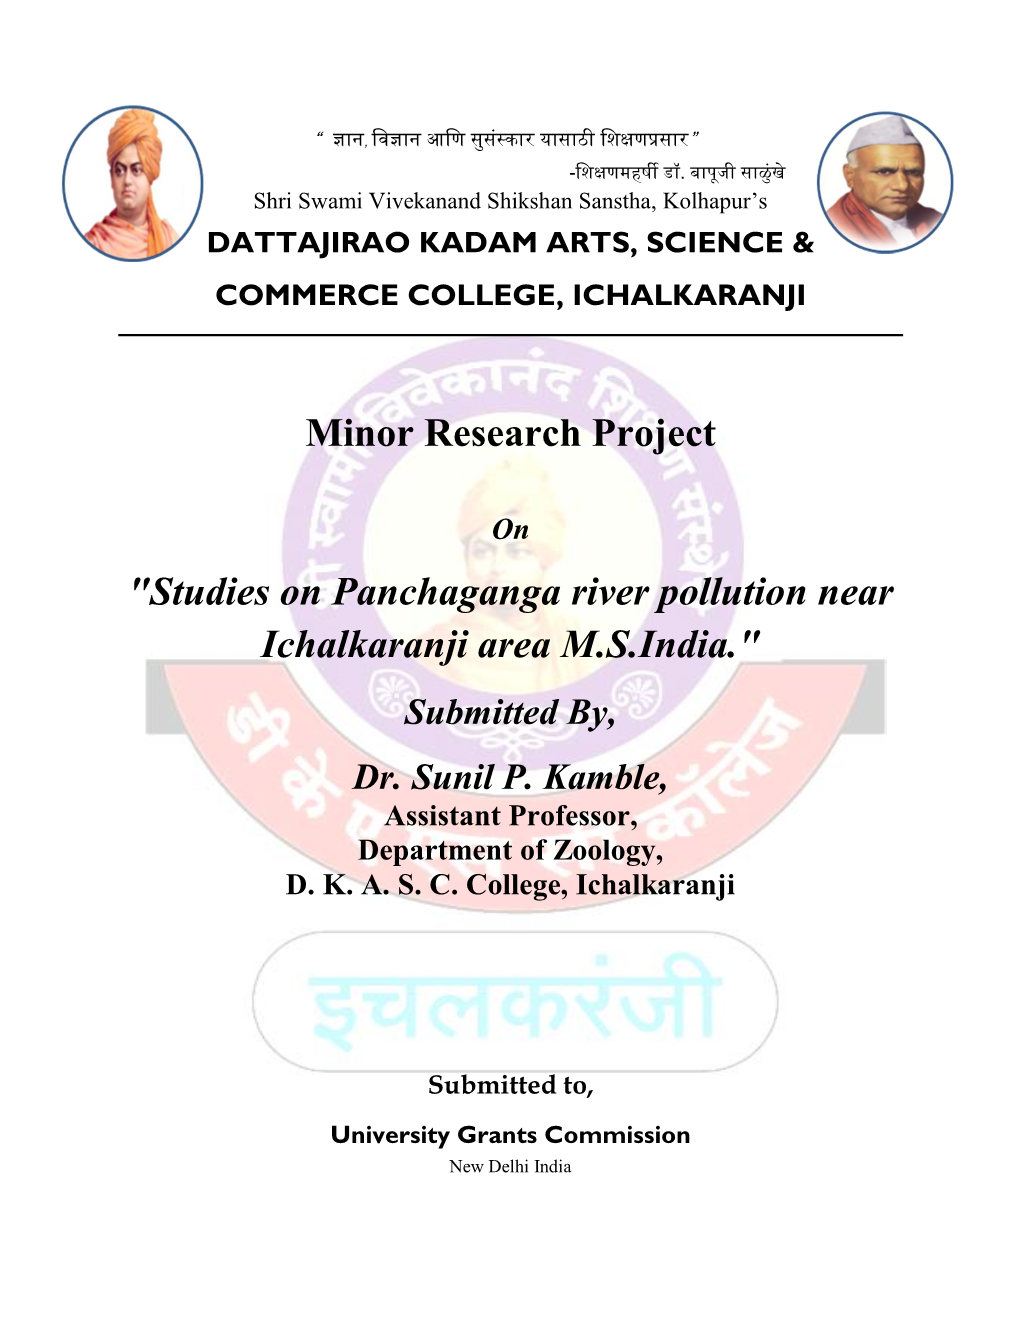 Minor Research Project "Studies on Panchaganga River Pollution Near